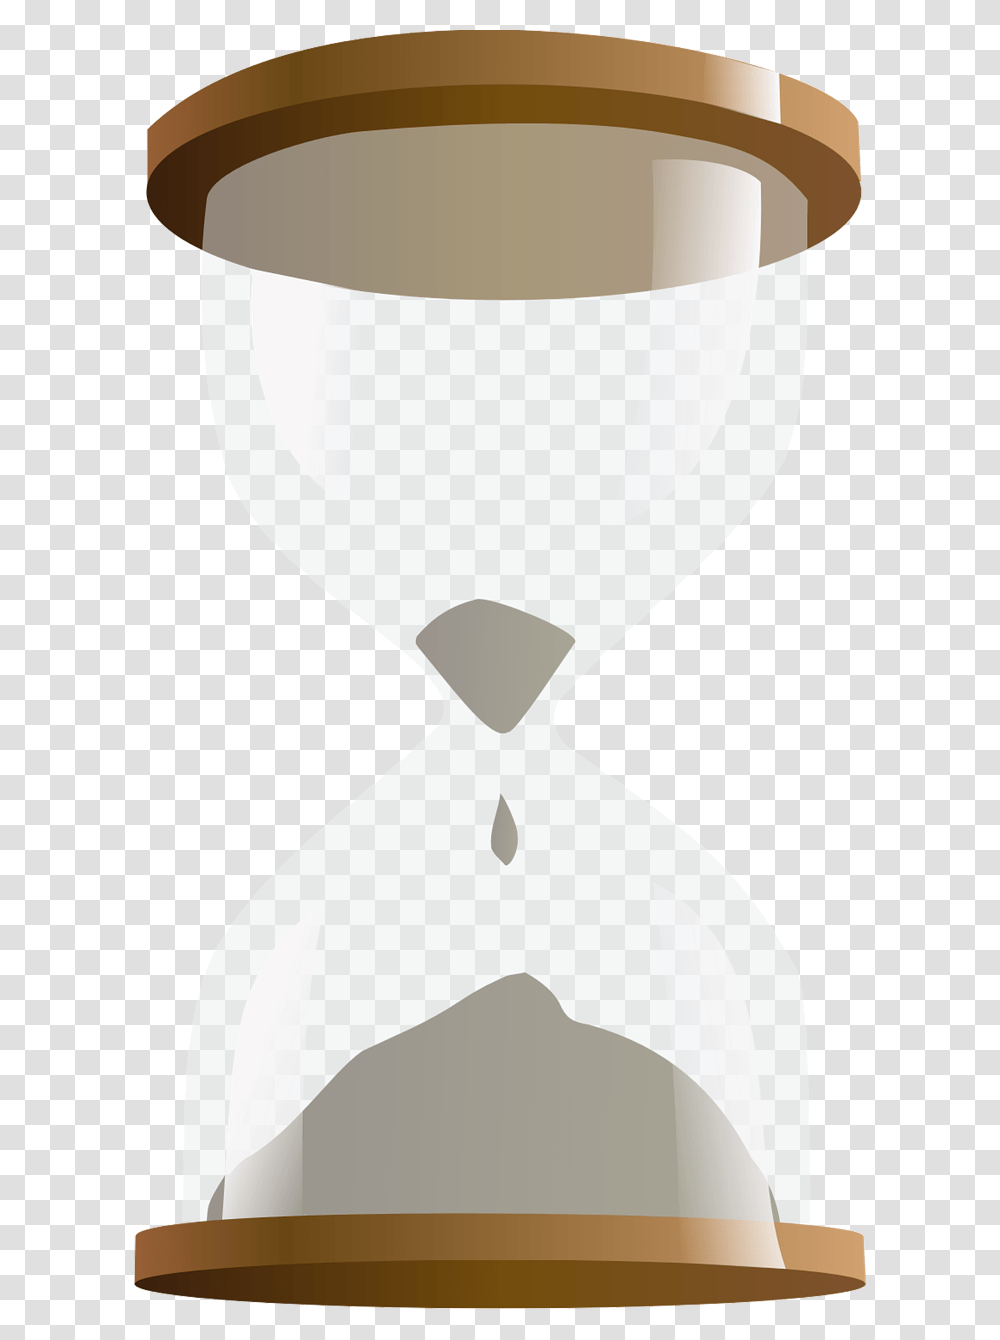 Hourglass Watch Areira Sand Free Picture Sand Watch, Lamp Transparent Png